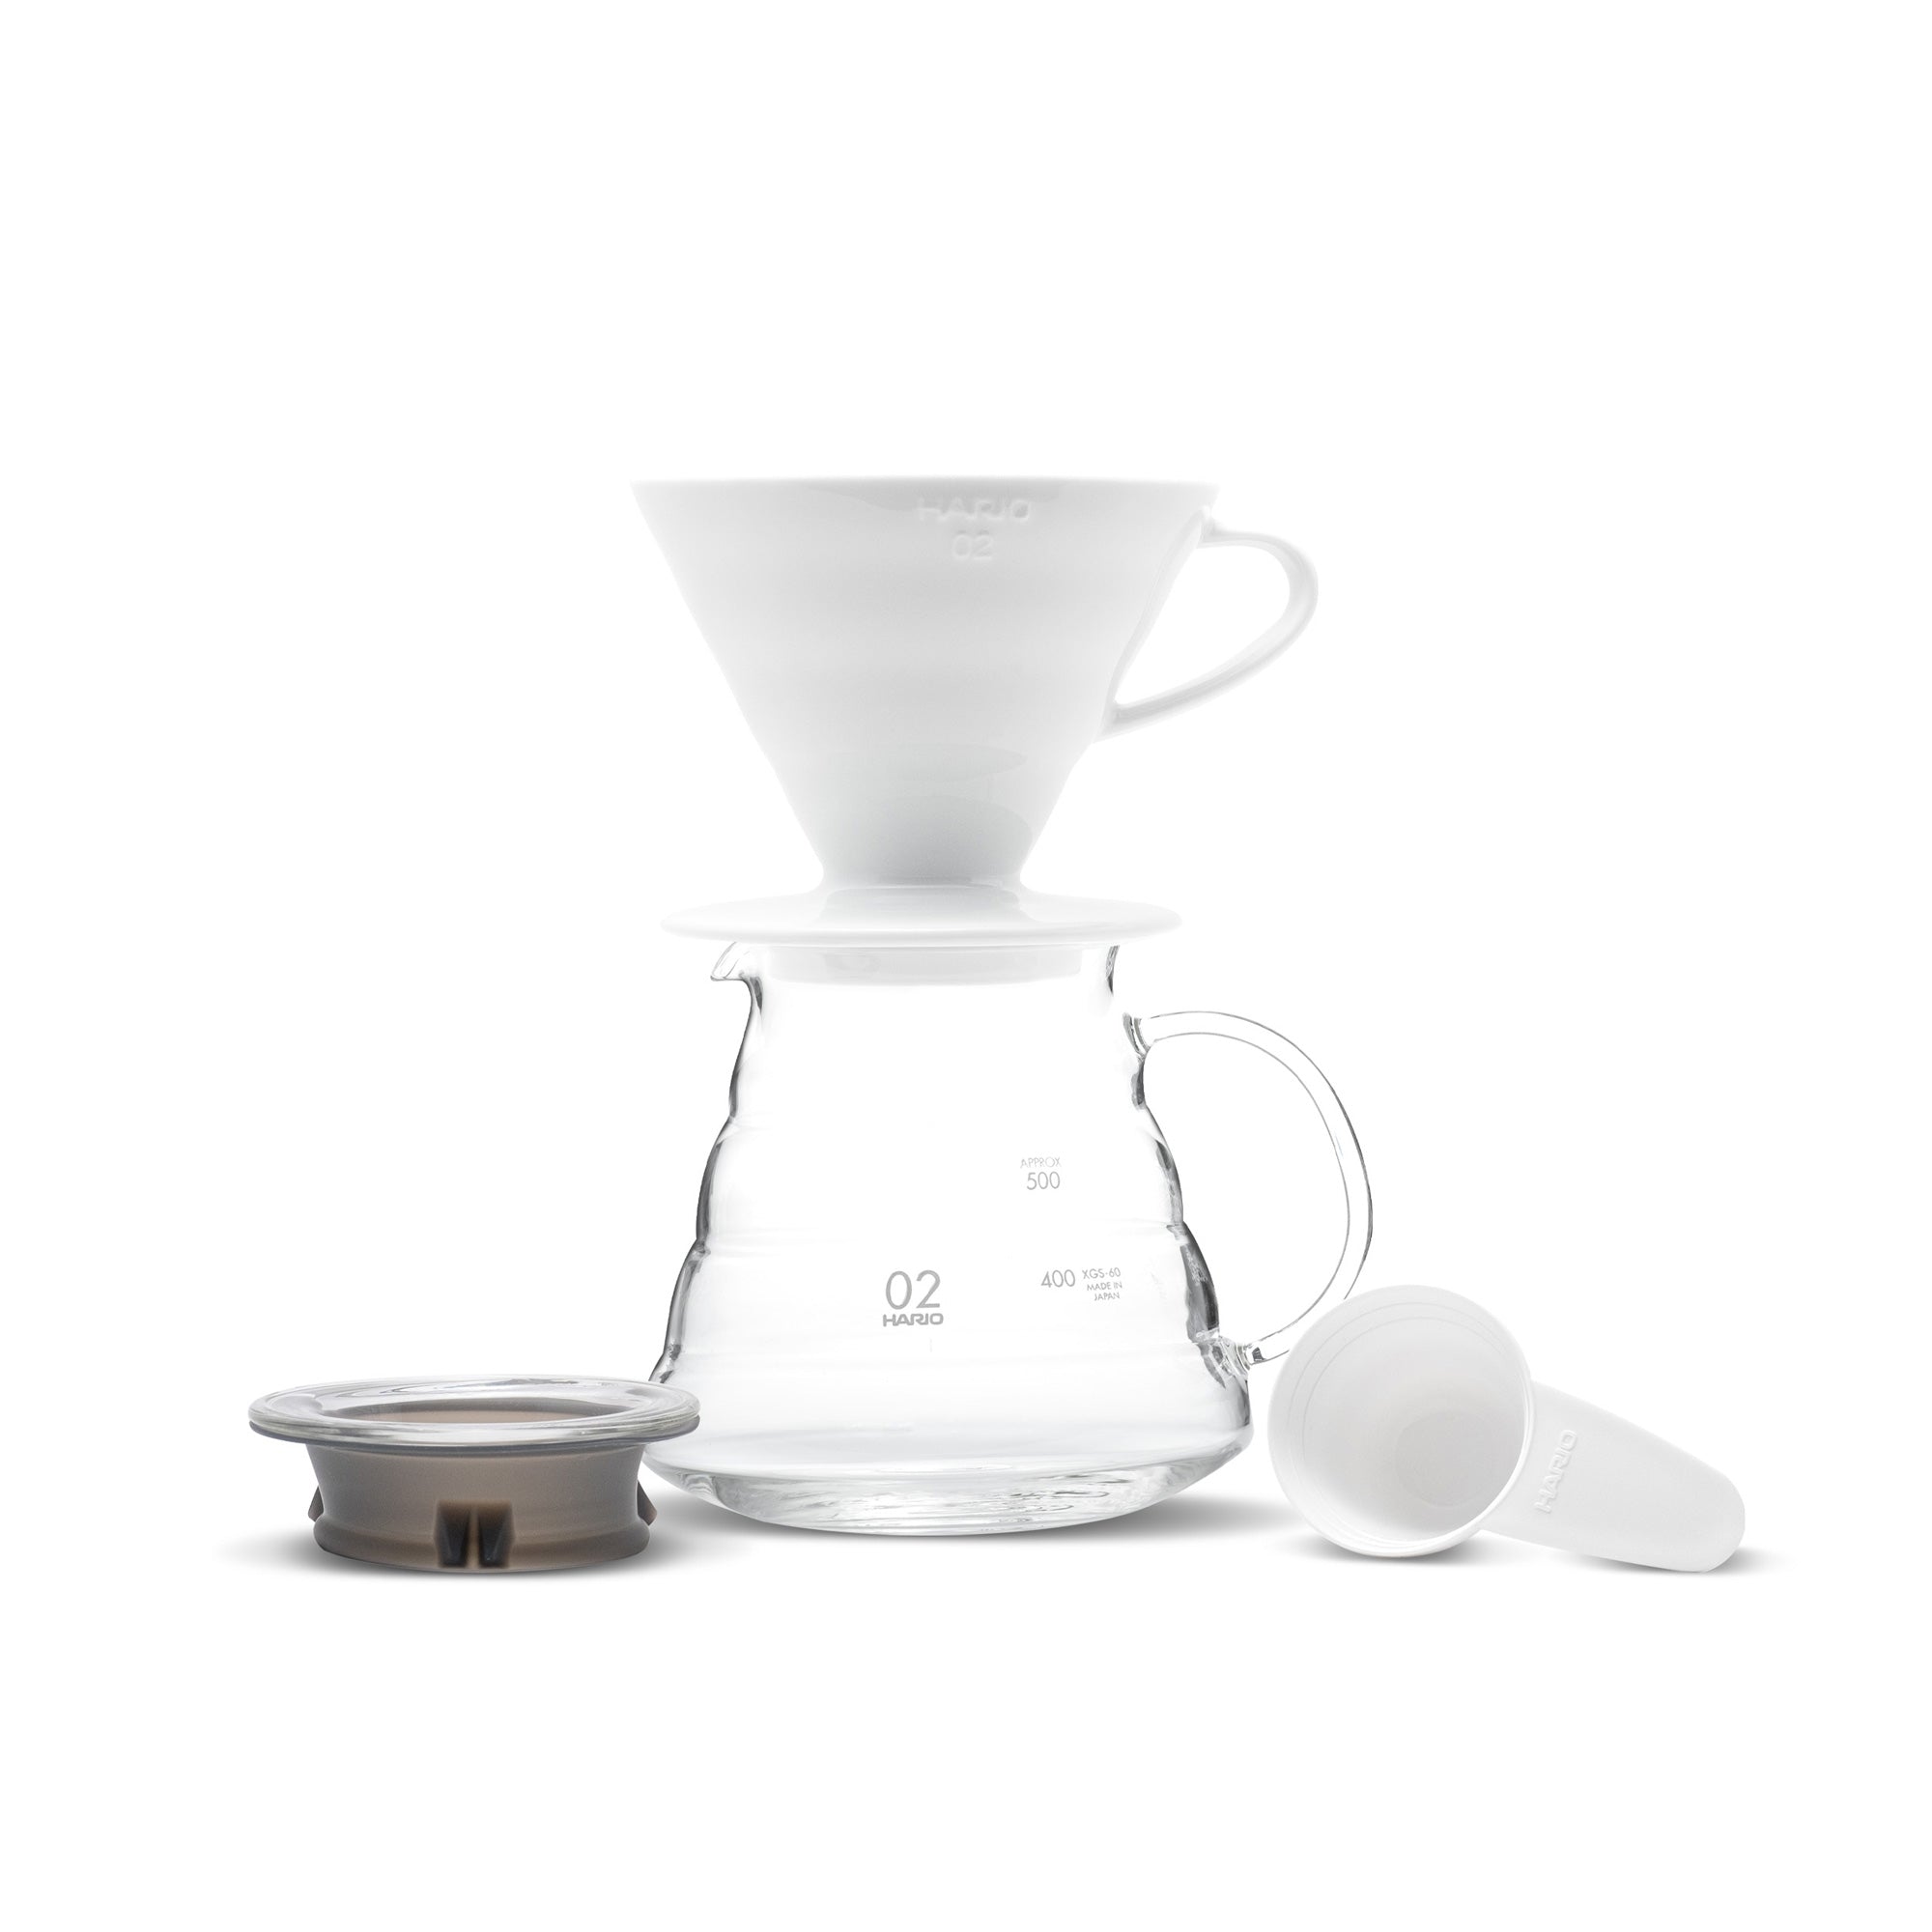 Hario V60 Coffee Pour Over Kit Bundle - Comes with Ceramic Dripper Measuring Spoon Glass Pot and Package of 100 Filters